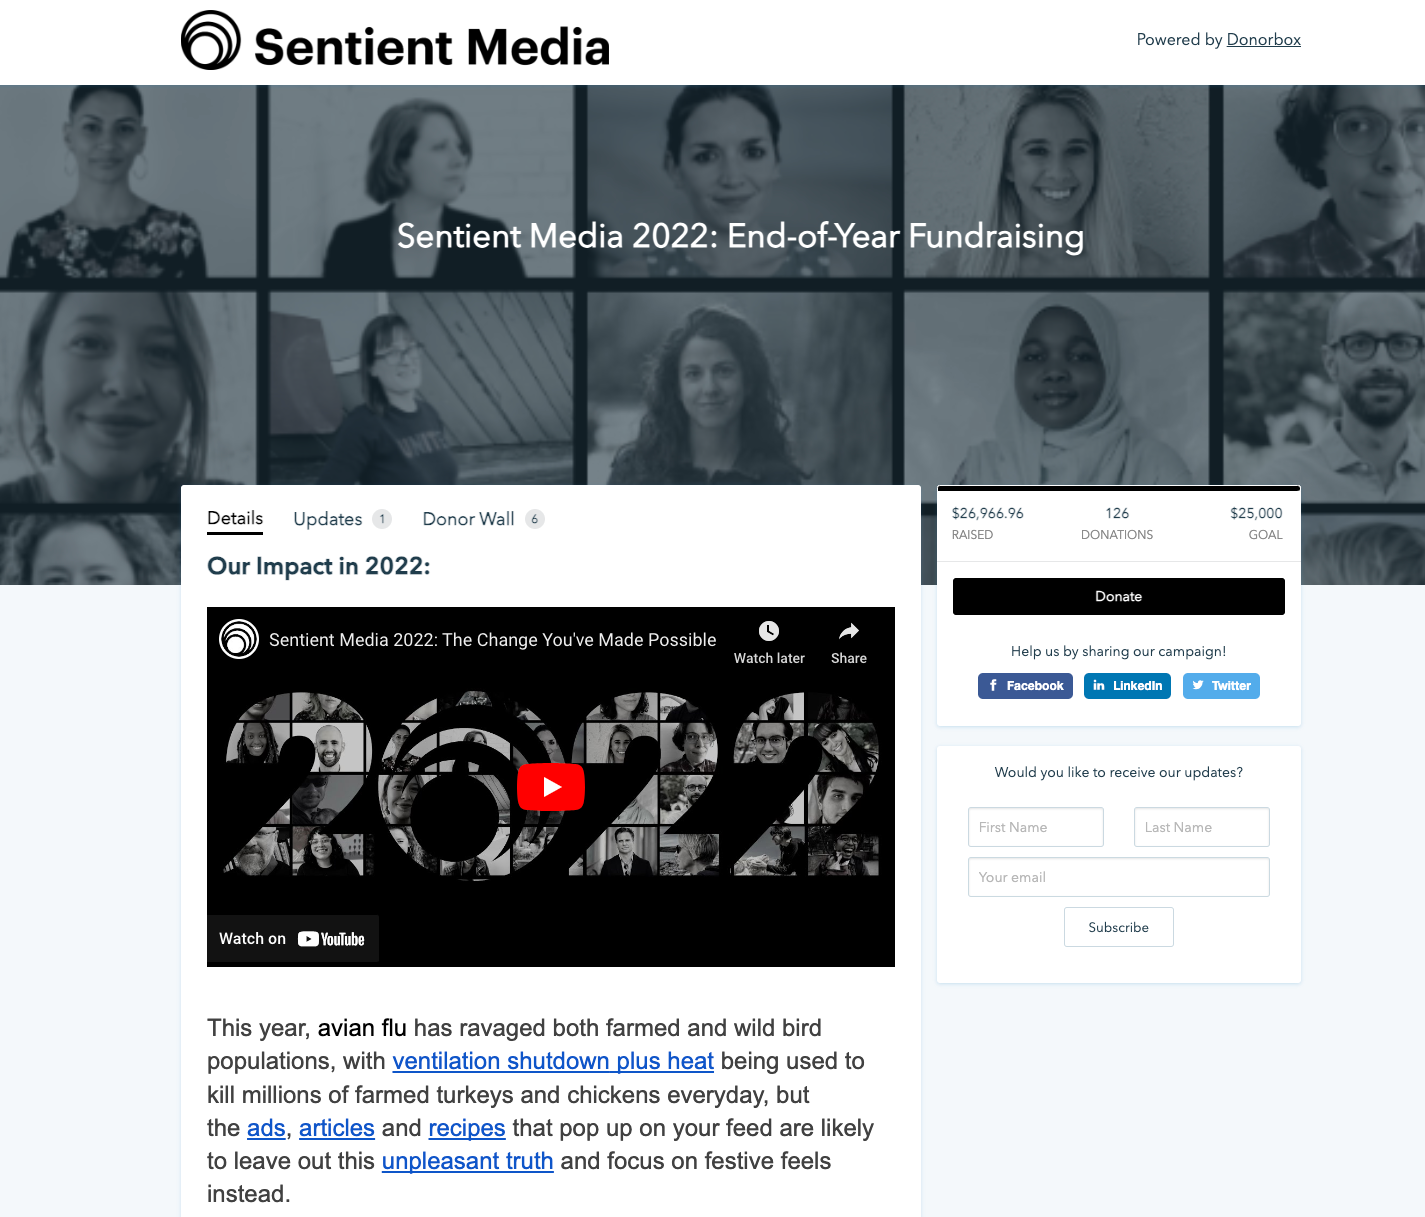 Sentient Media's 2022 Year-End Campaign